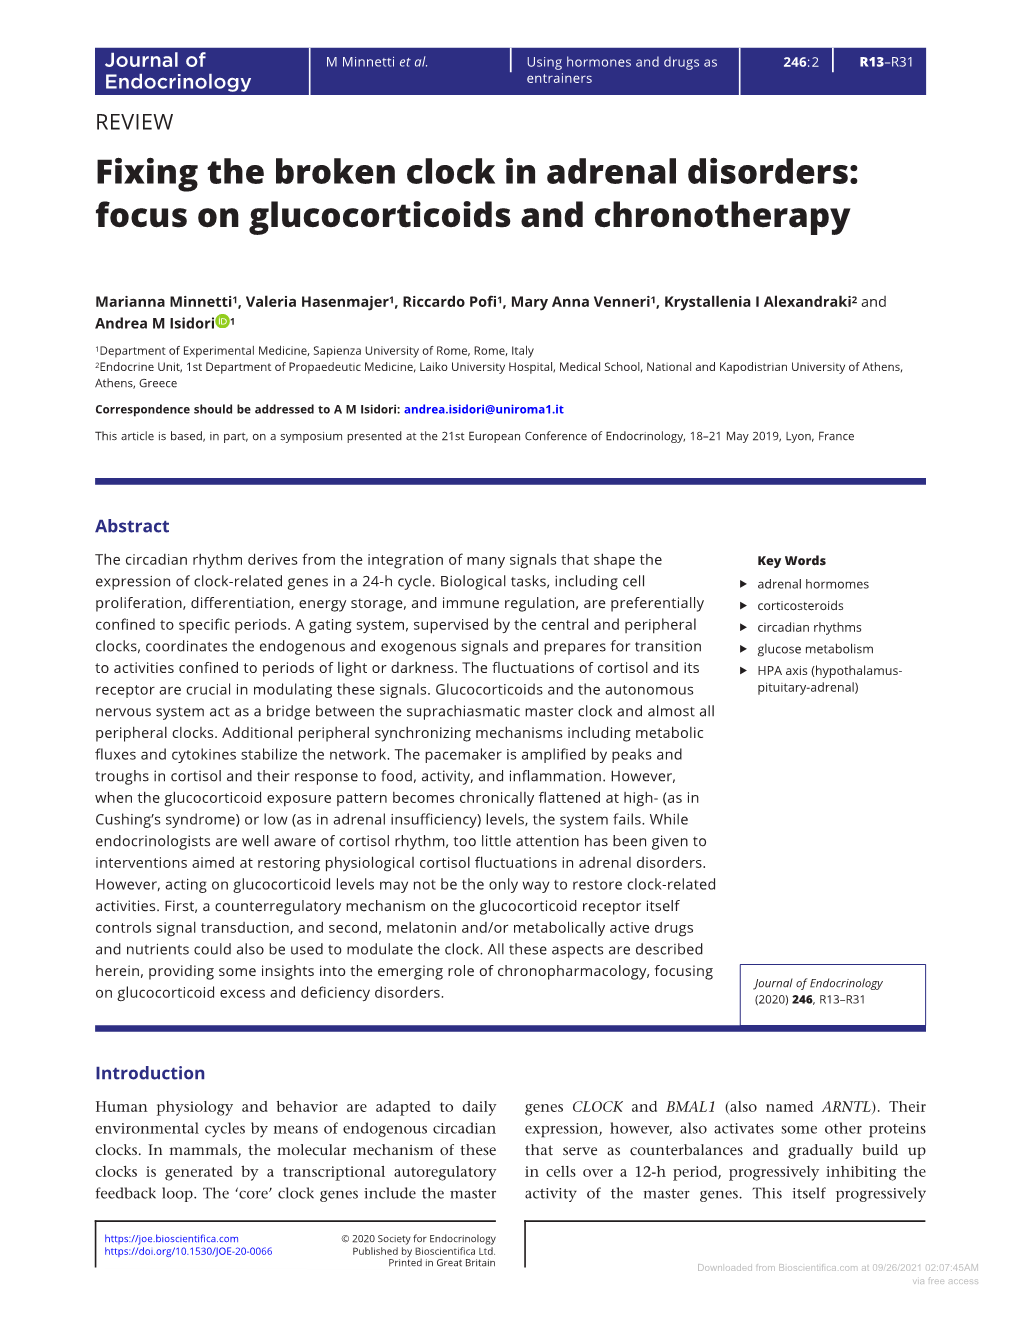 Fixing the Broken Clock in Adrenal Disorders: Focus on Glucocorticoids and Chronotherapy